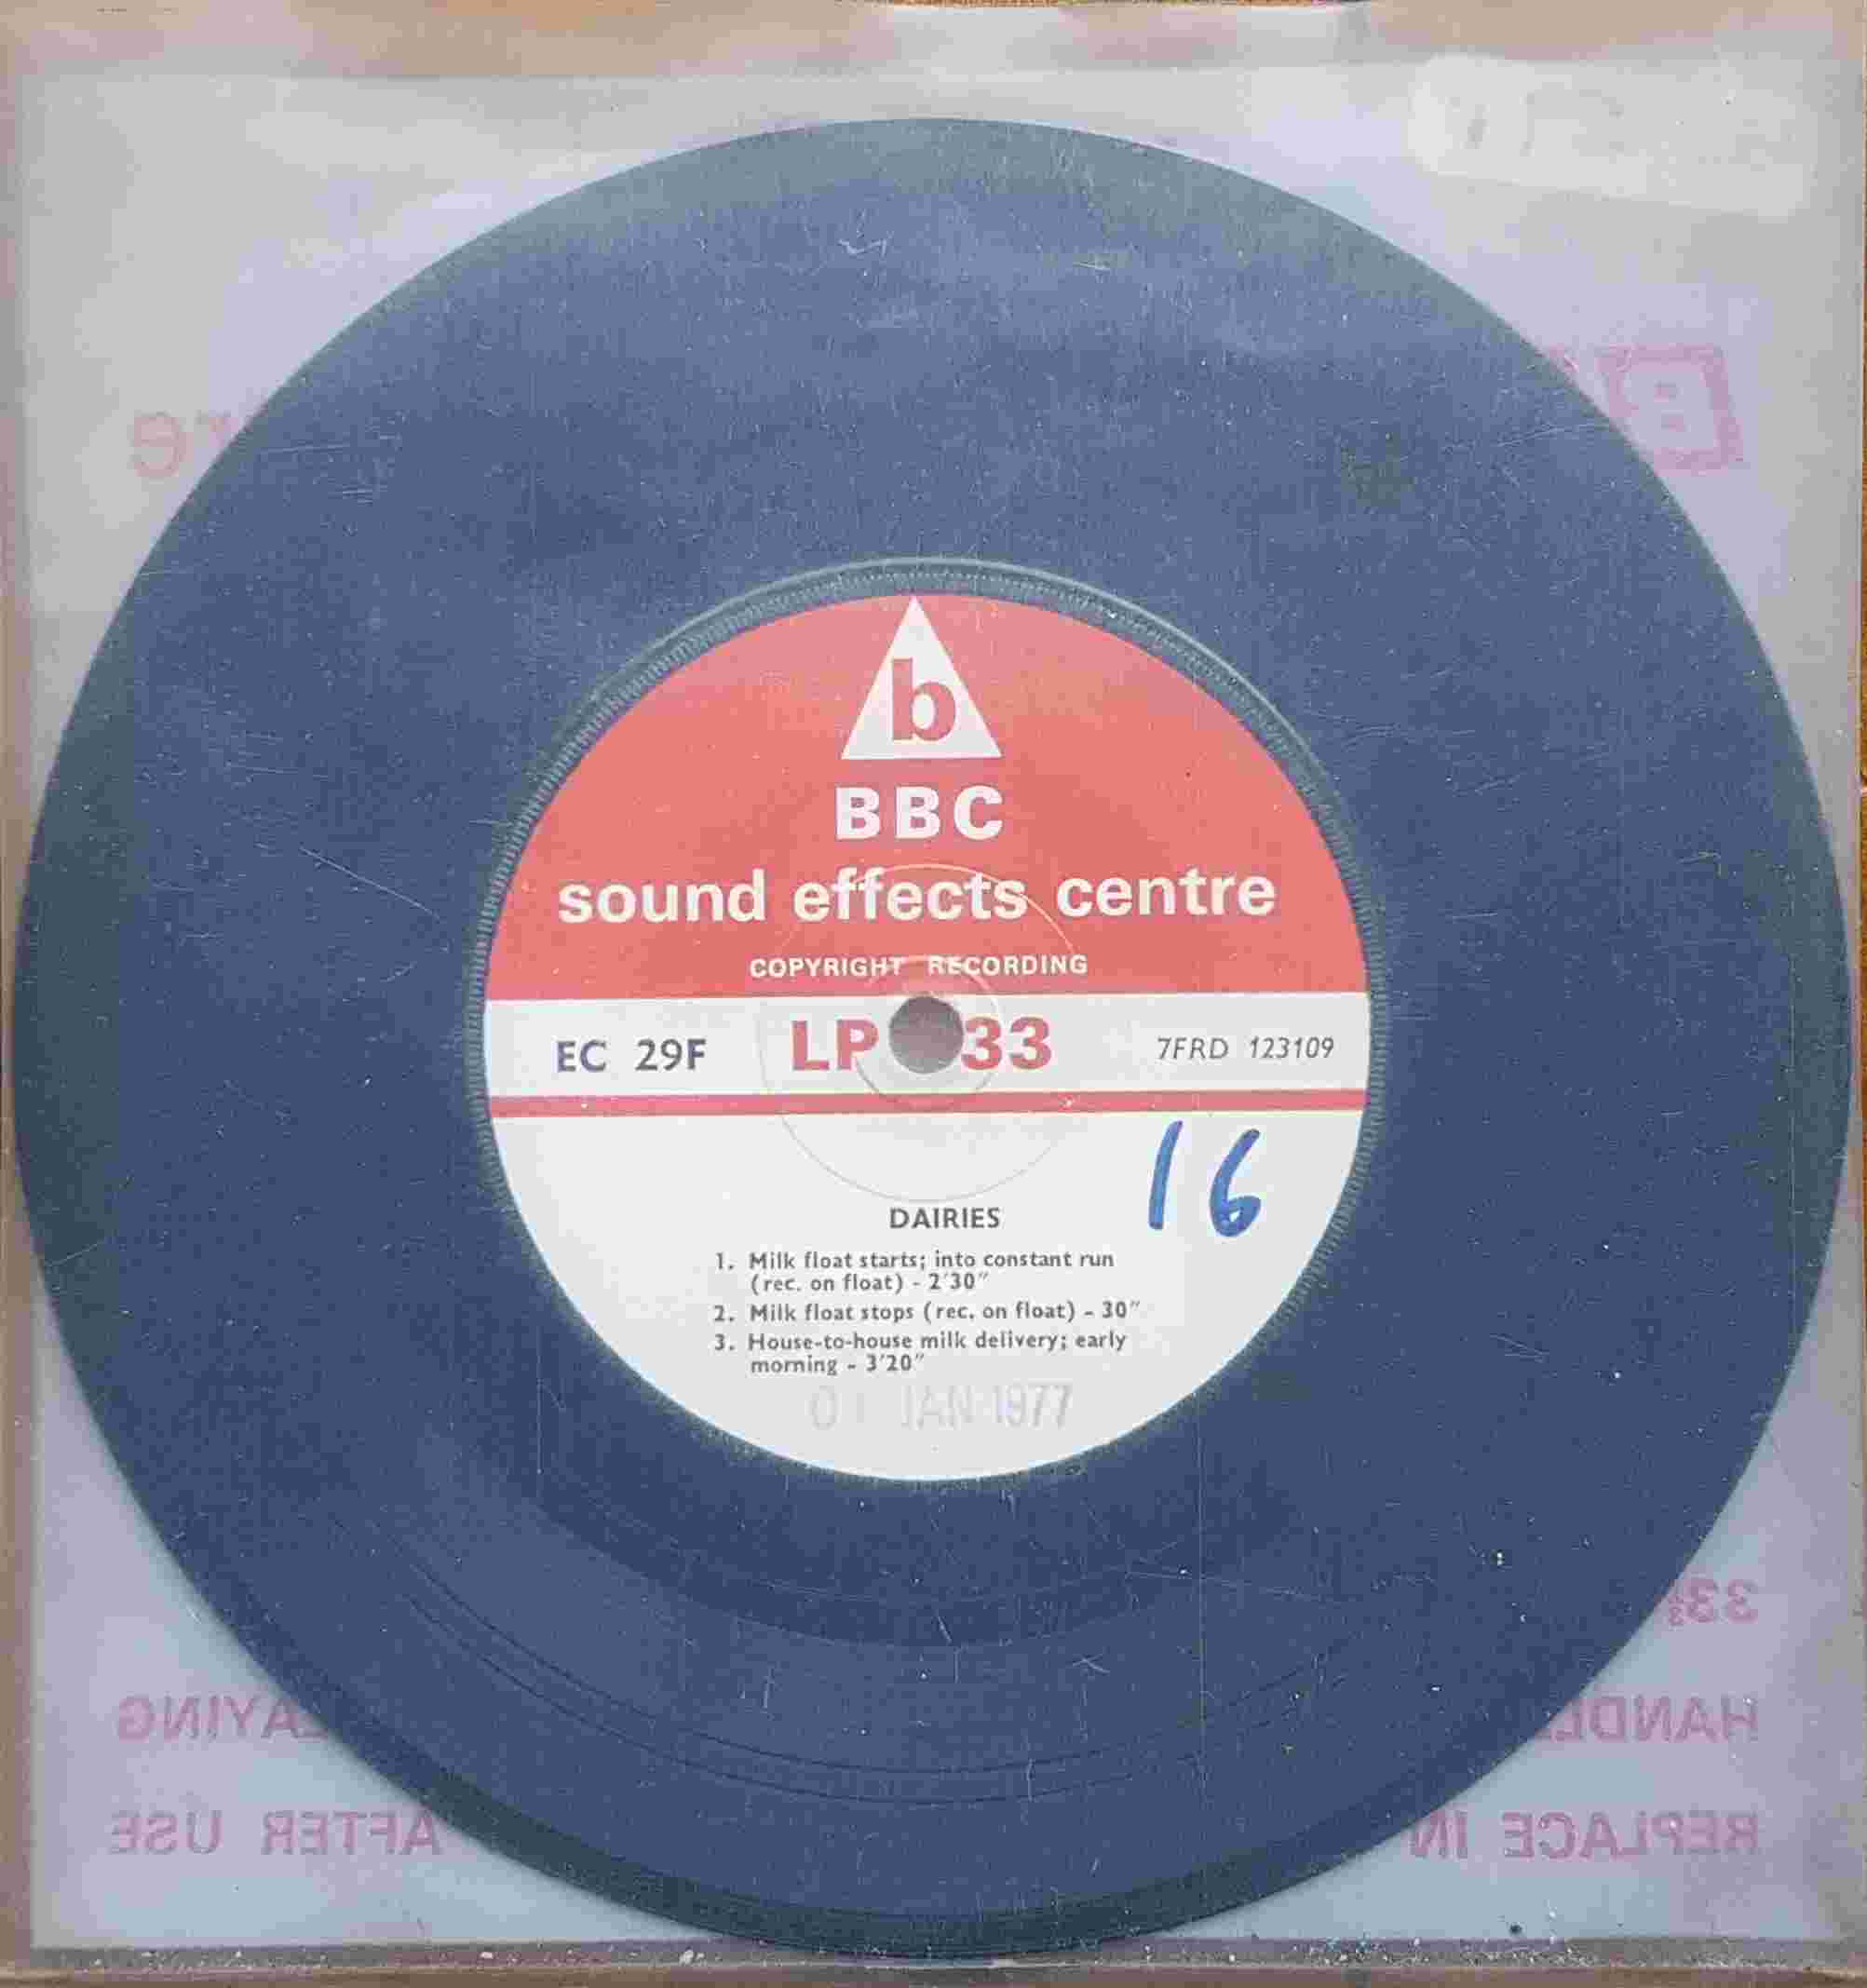 Picture of EC 29F Dairies by artist Not registered from the BBC records and Tapes library